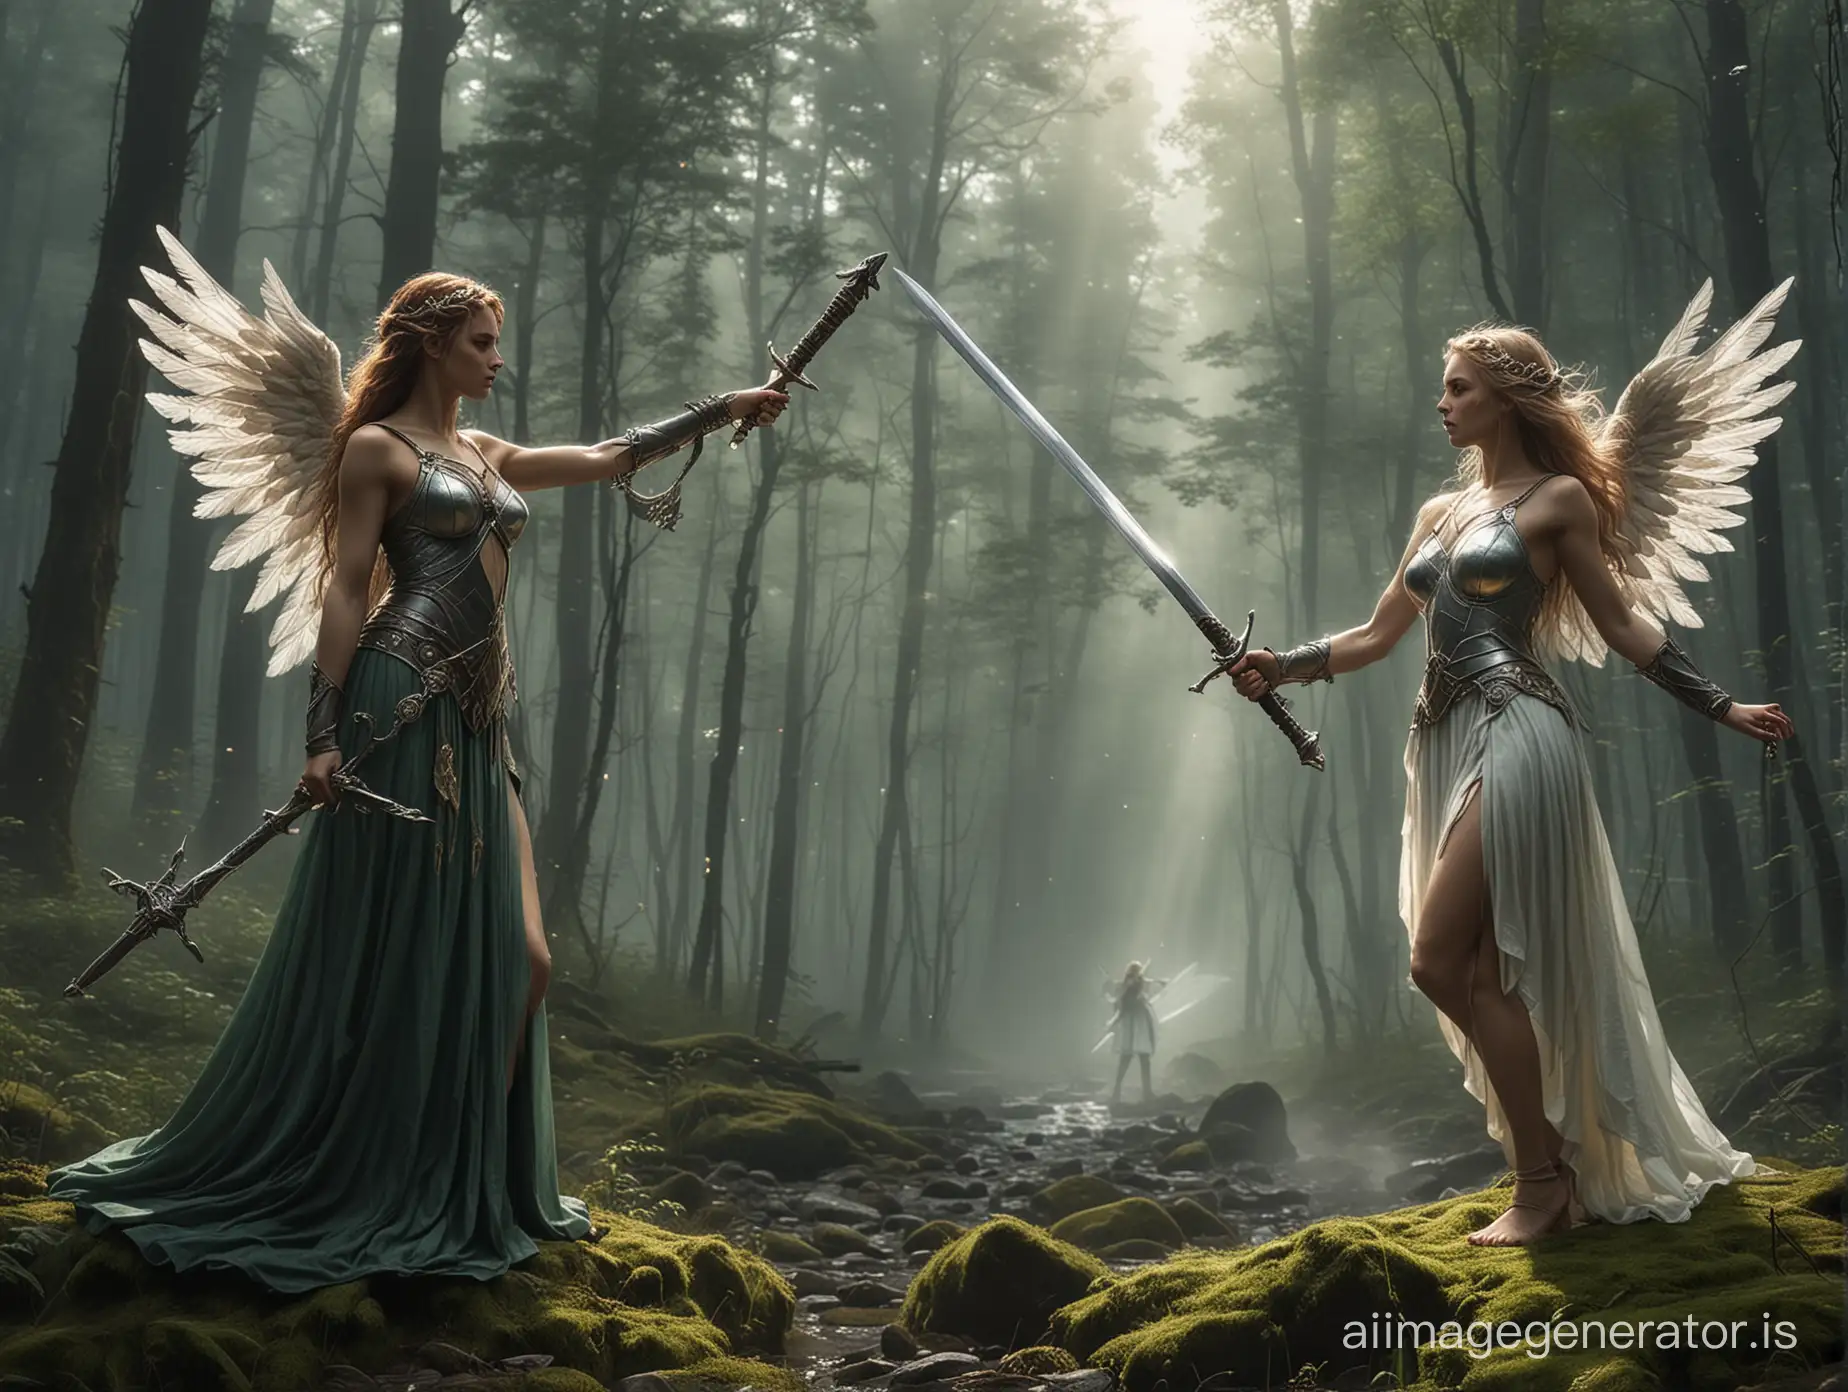 Mountain-Battle-Forest-Nymph-and-Angel-Womens-Sword-and-Scepter-Clash